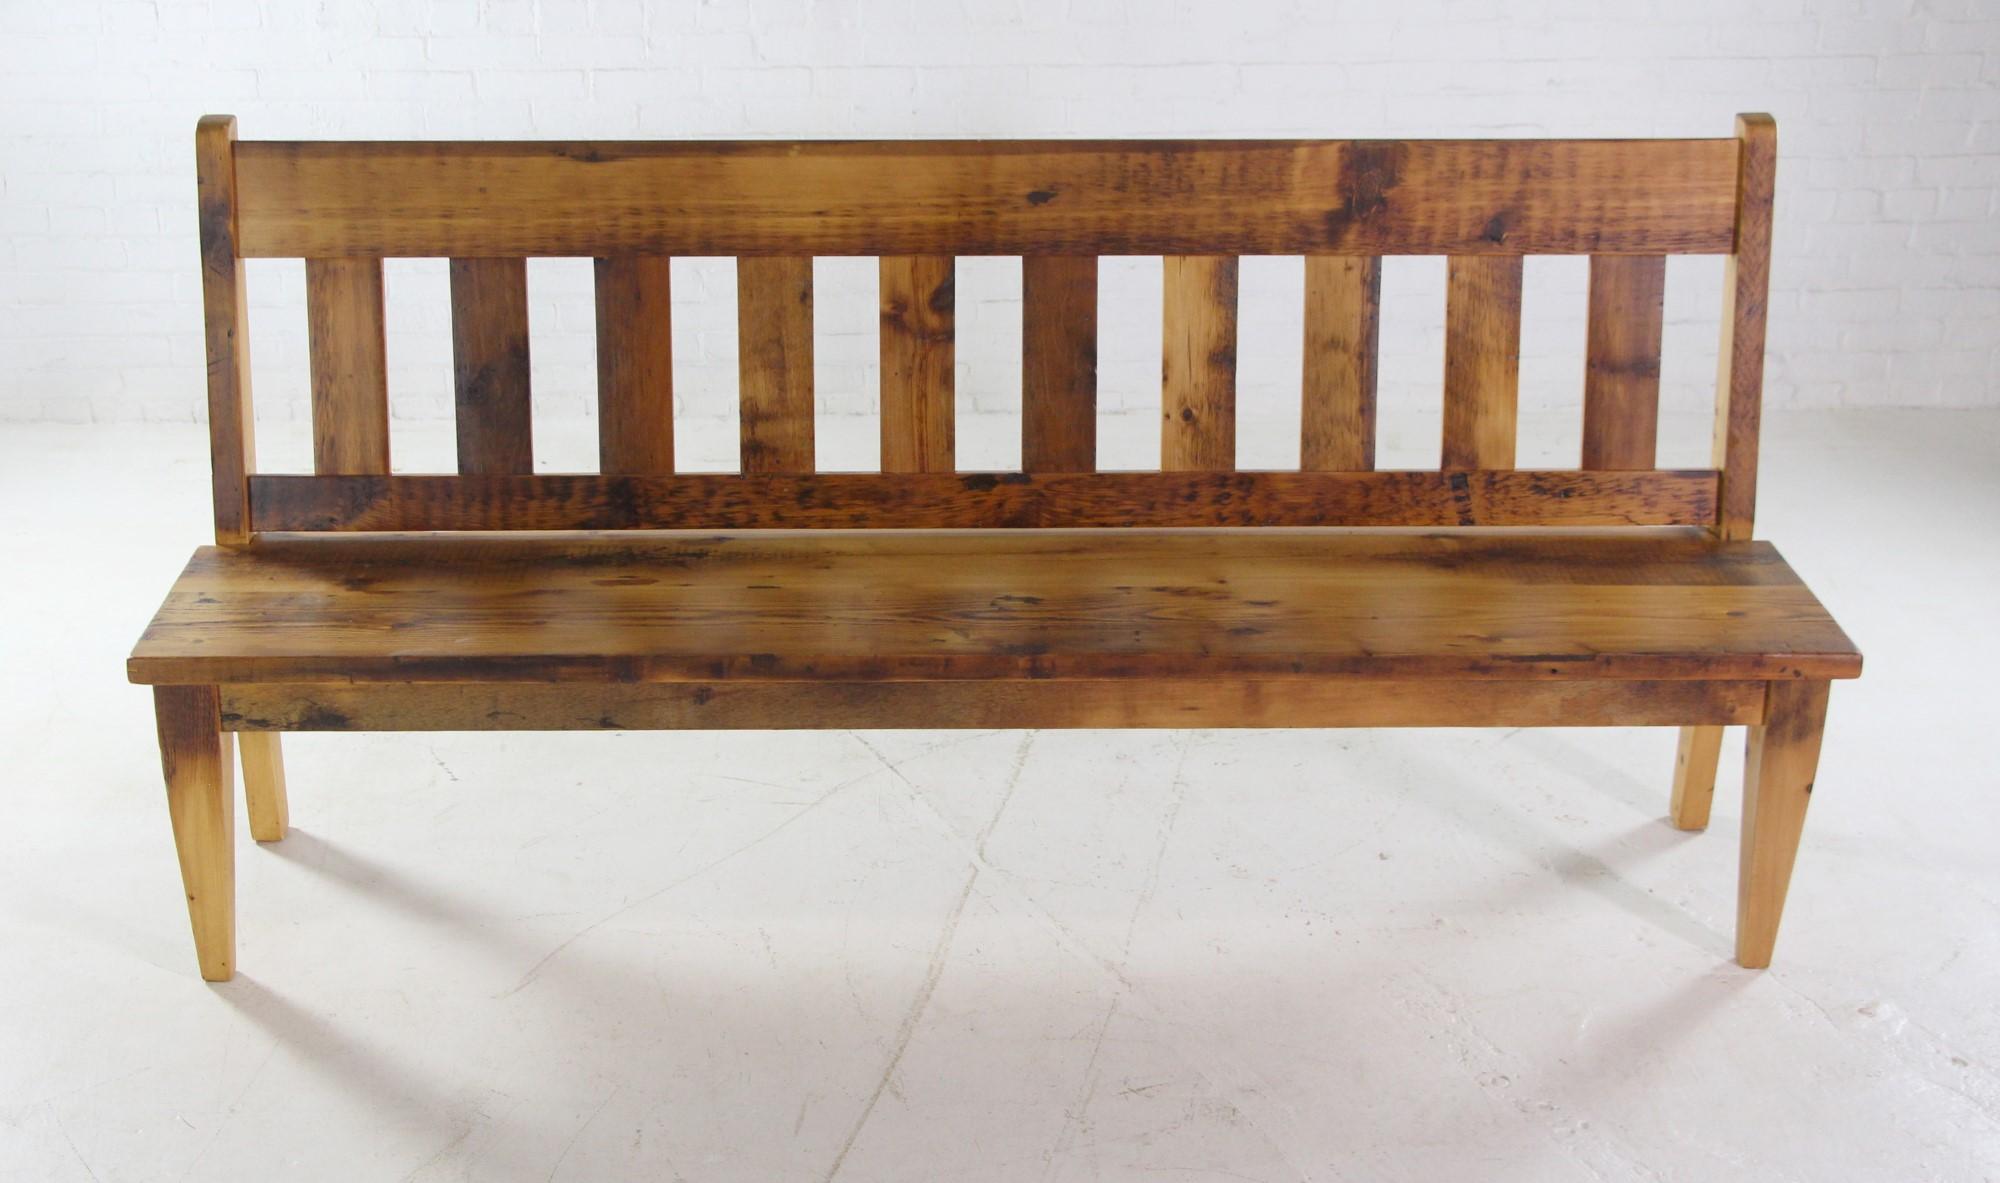 7 foot long pine slatted bench with back done in a natural stain finish. It was handcrafted and made from reclaimed pine beams giving it a one-of-a-Kind quality. Small quantity available at time of posting. Please note shading may vary. Small